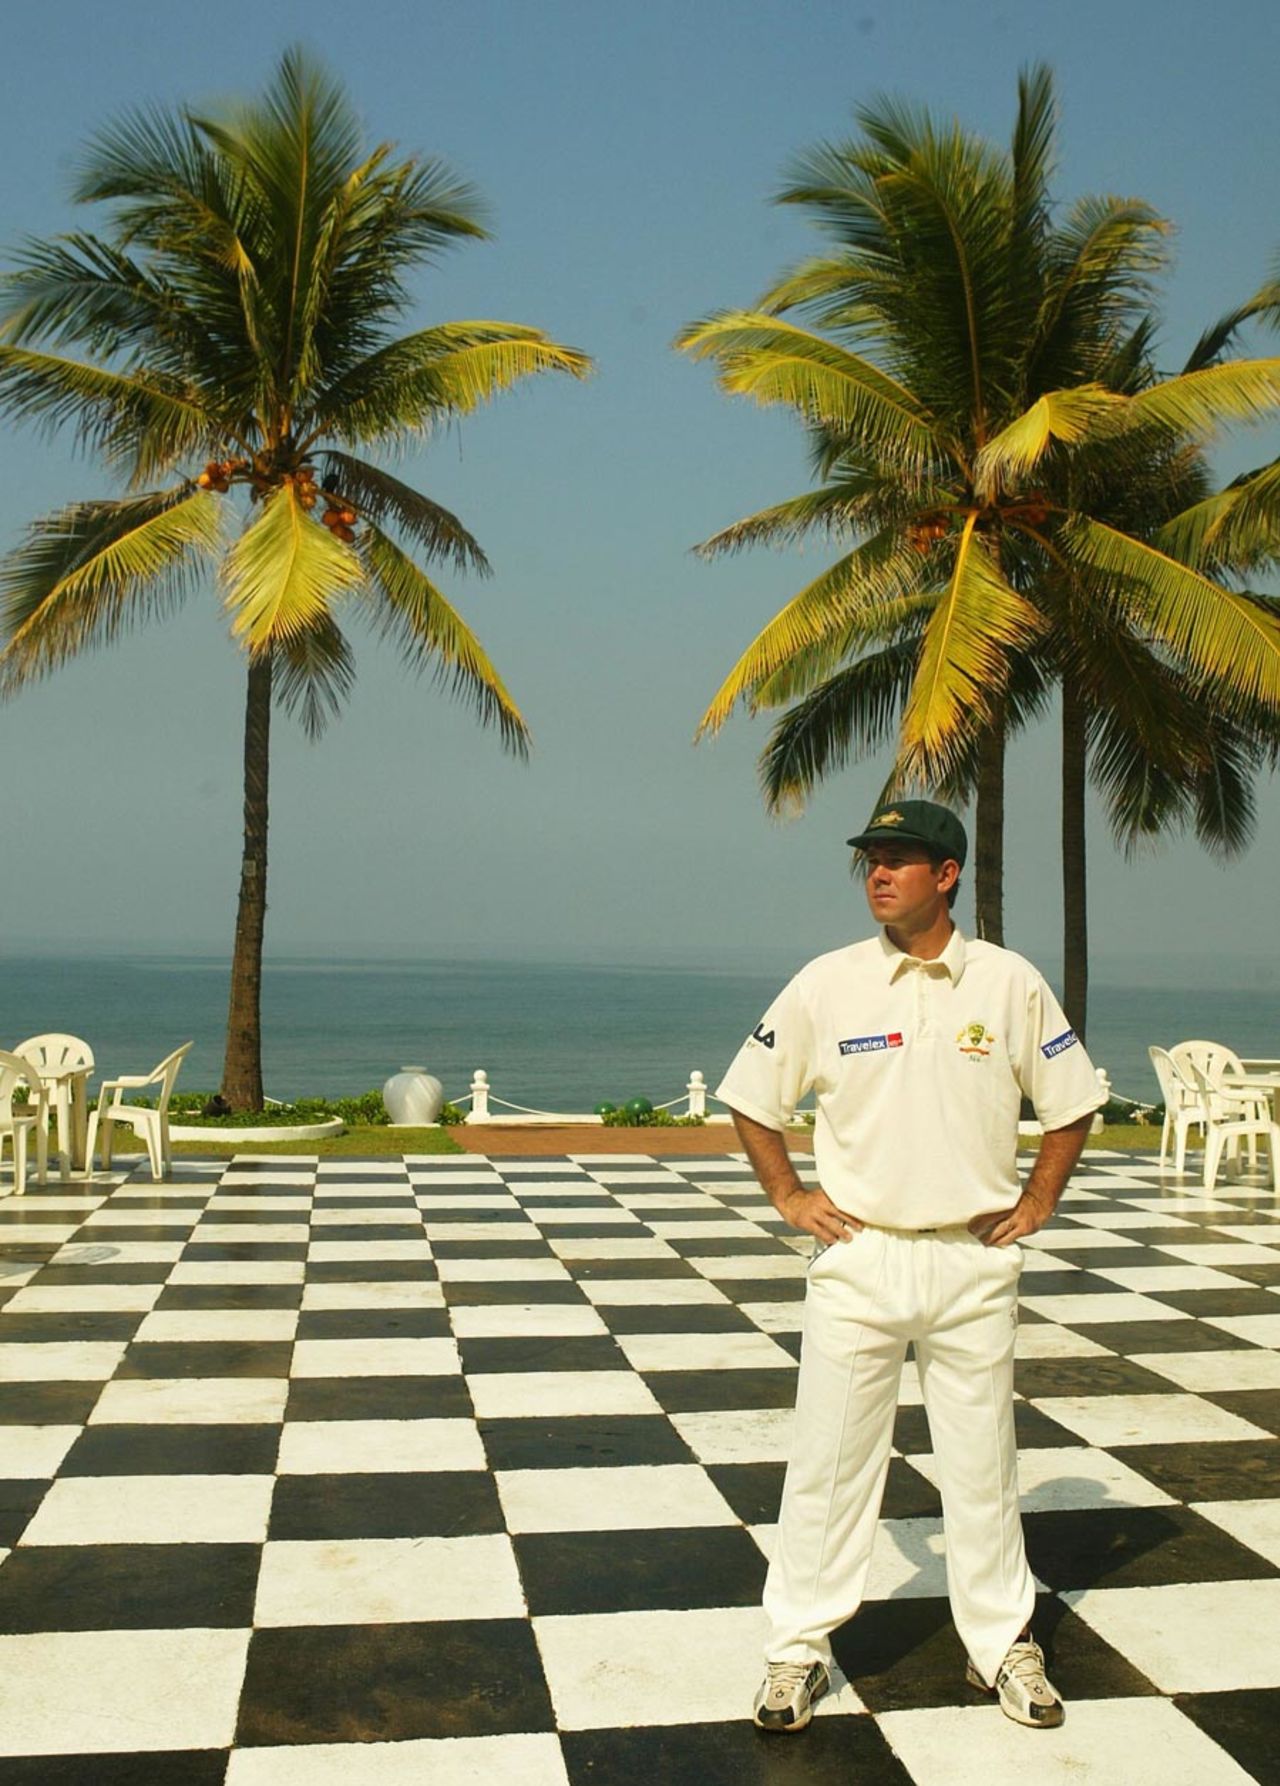 Ricky Ponting on the chessboard deck at the Galle Face Hotel, Colombo, March 5, 2004 in Colombo